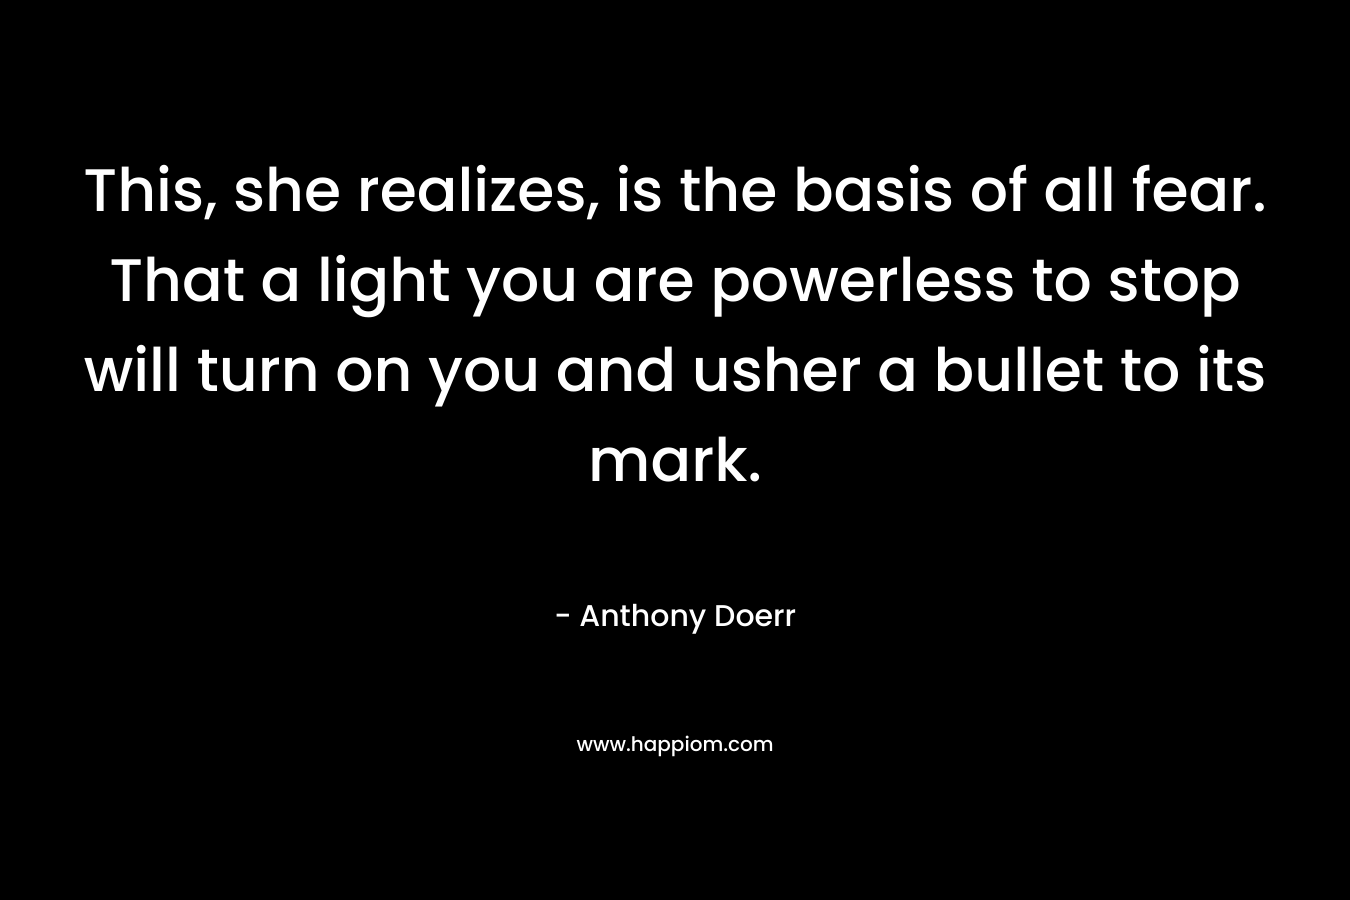 This, she realizes, is the basis of all fear. That a light you are powerless to stop will turn on you and usher a bullet to its mark.